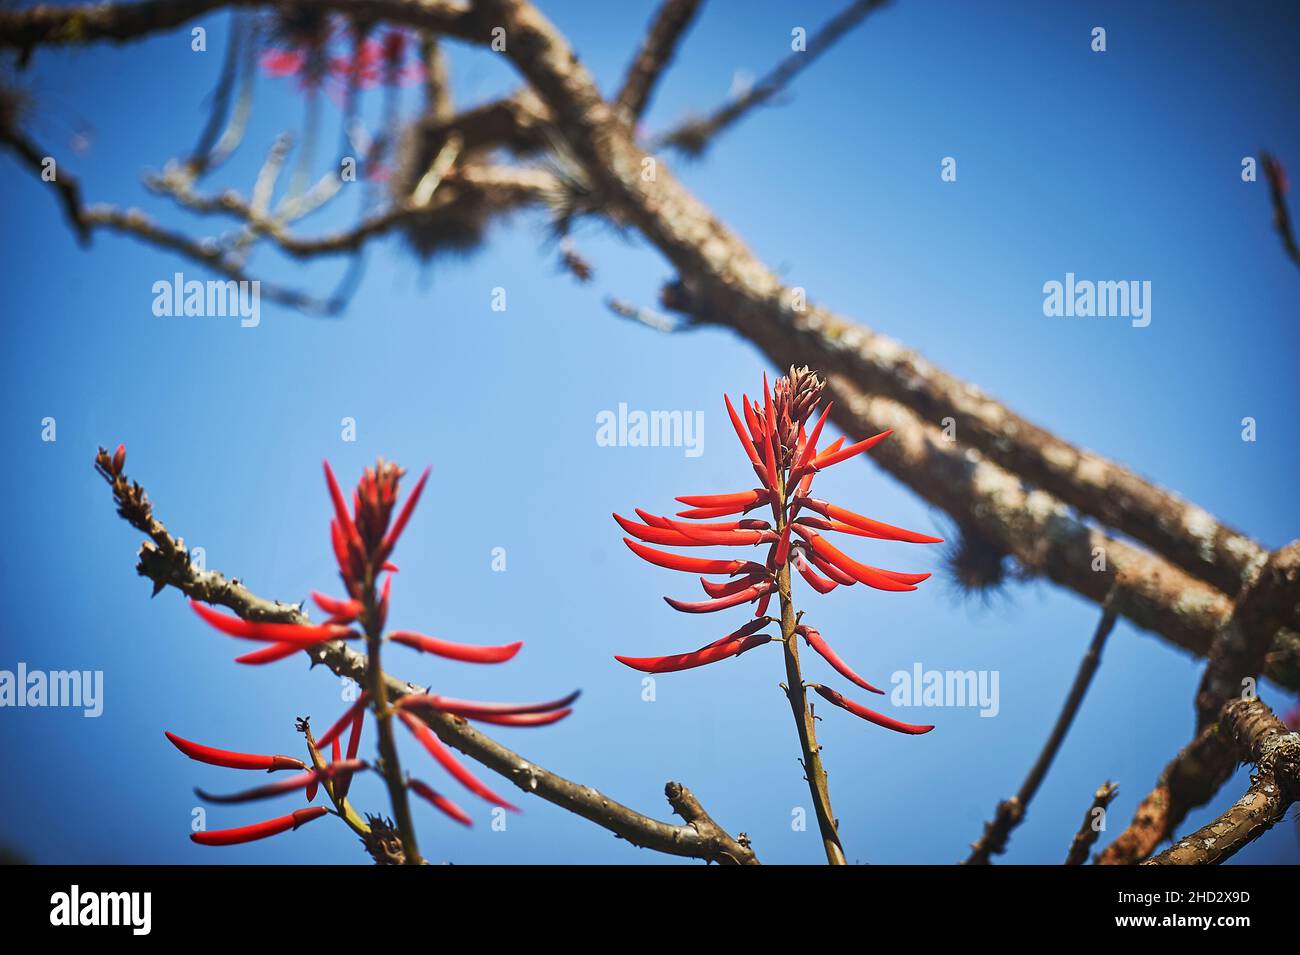 Low angle view of Erythrina americana plants with blurred branches and a blue sunny sky Stock Photo